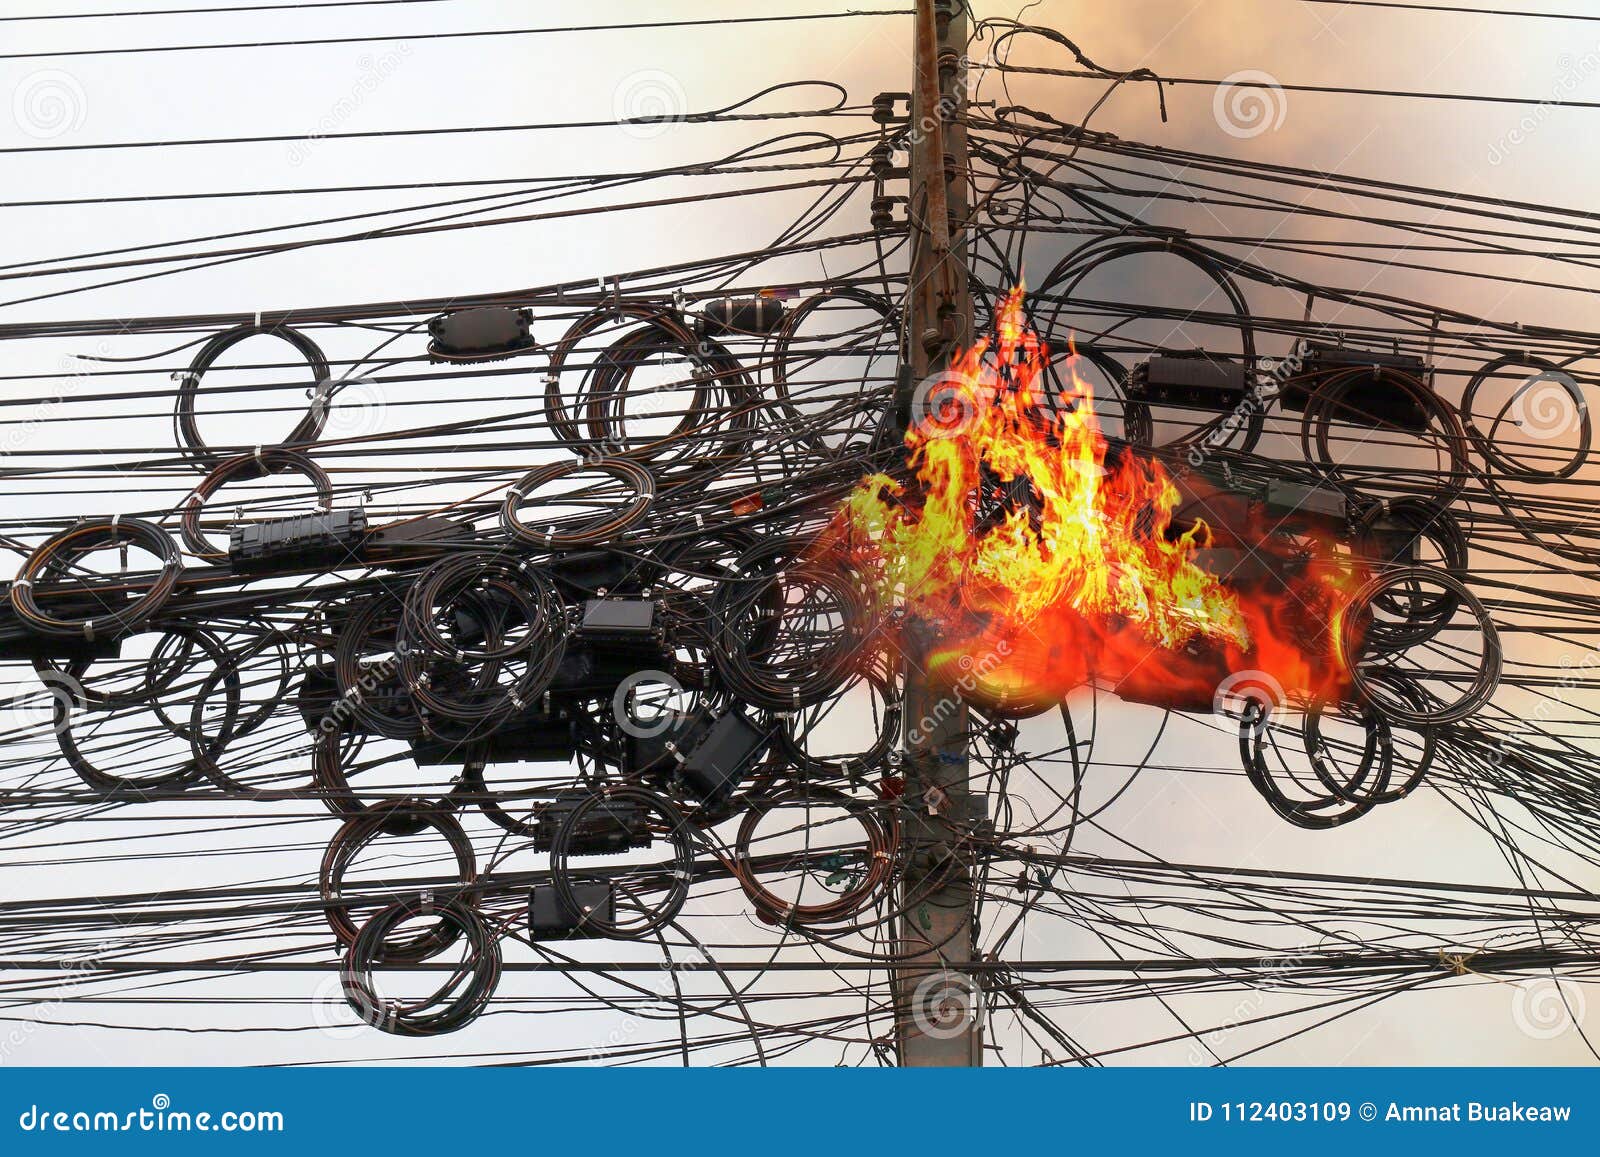 fire burning high voltage cables power, danger wire tangle cord electrical energy